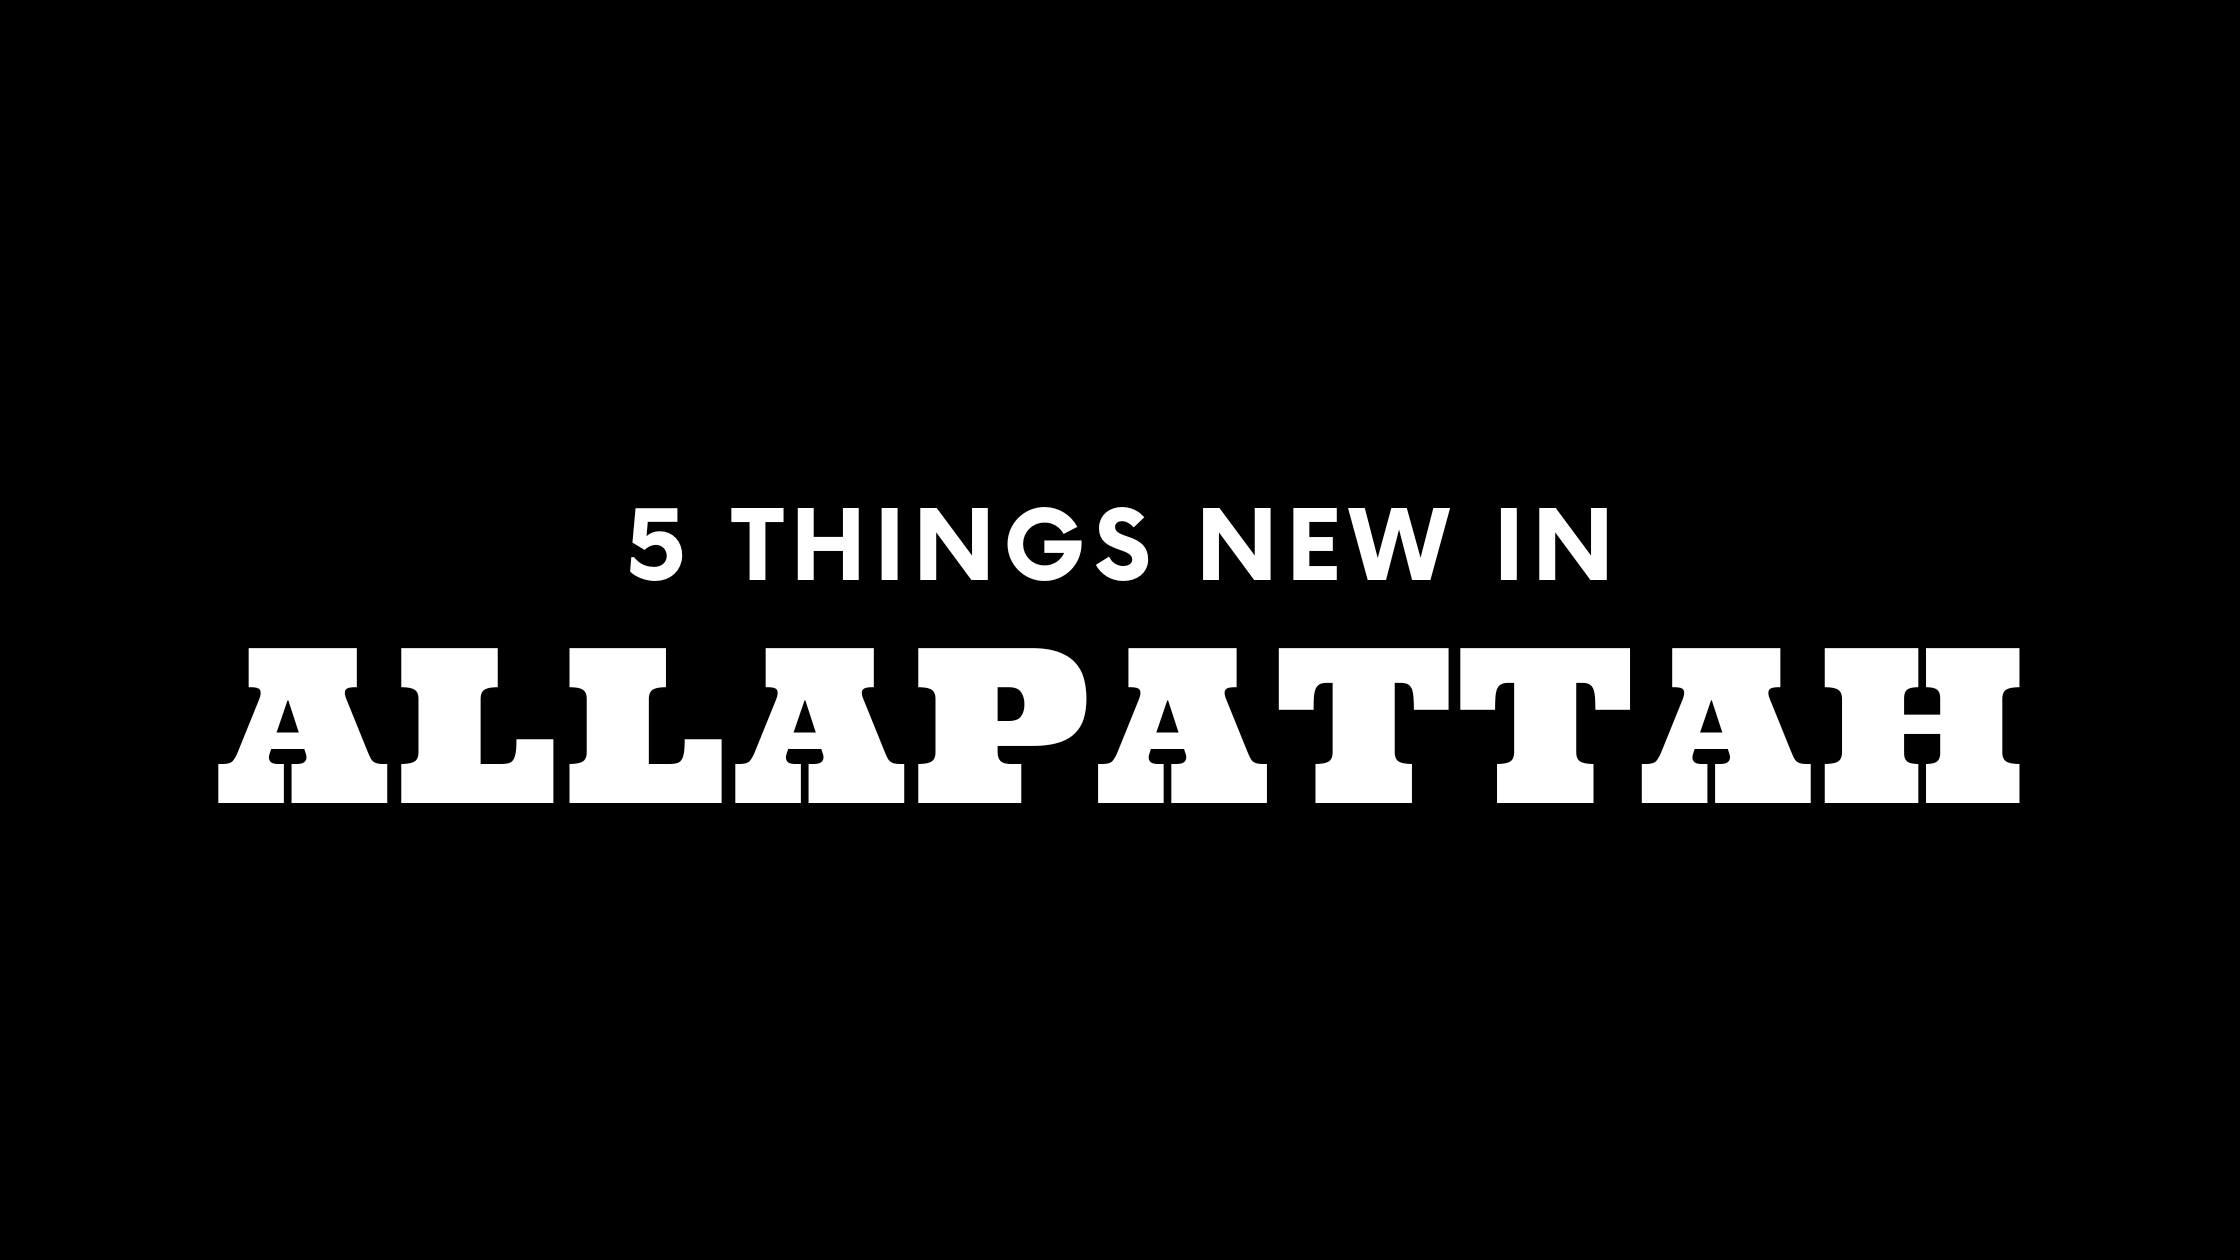 5 Things New In Allapattah!